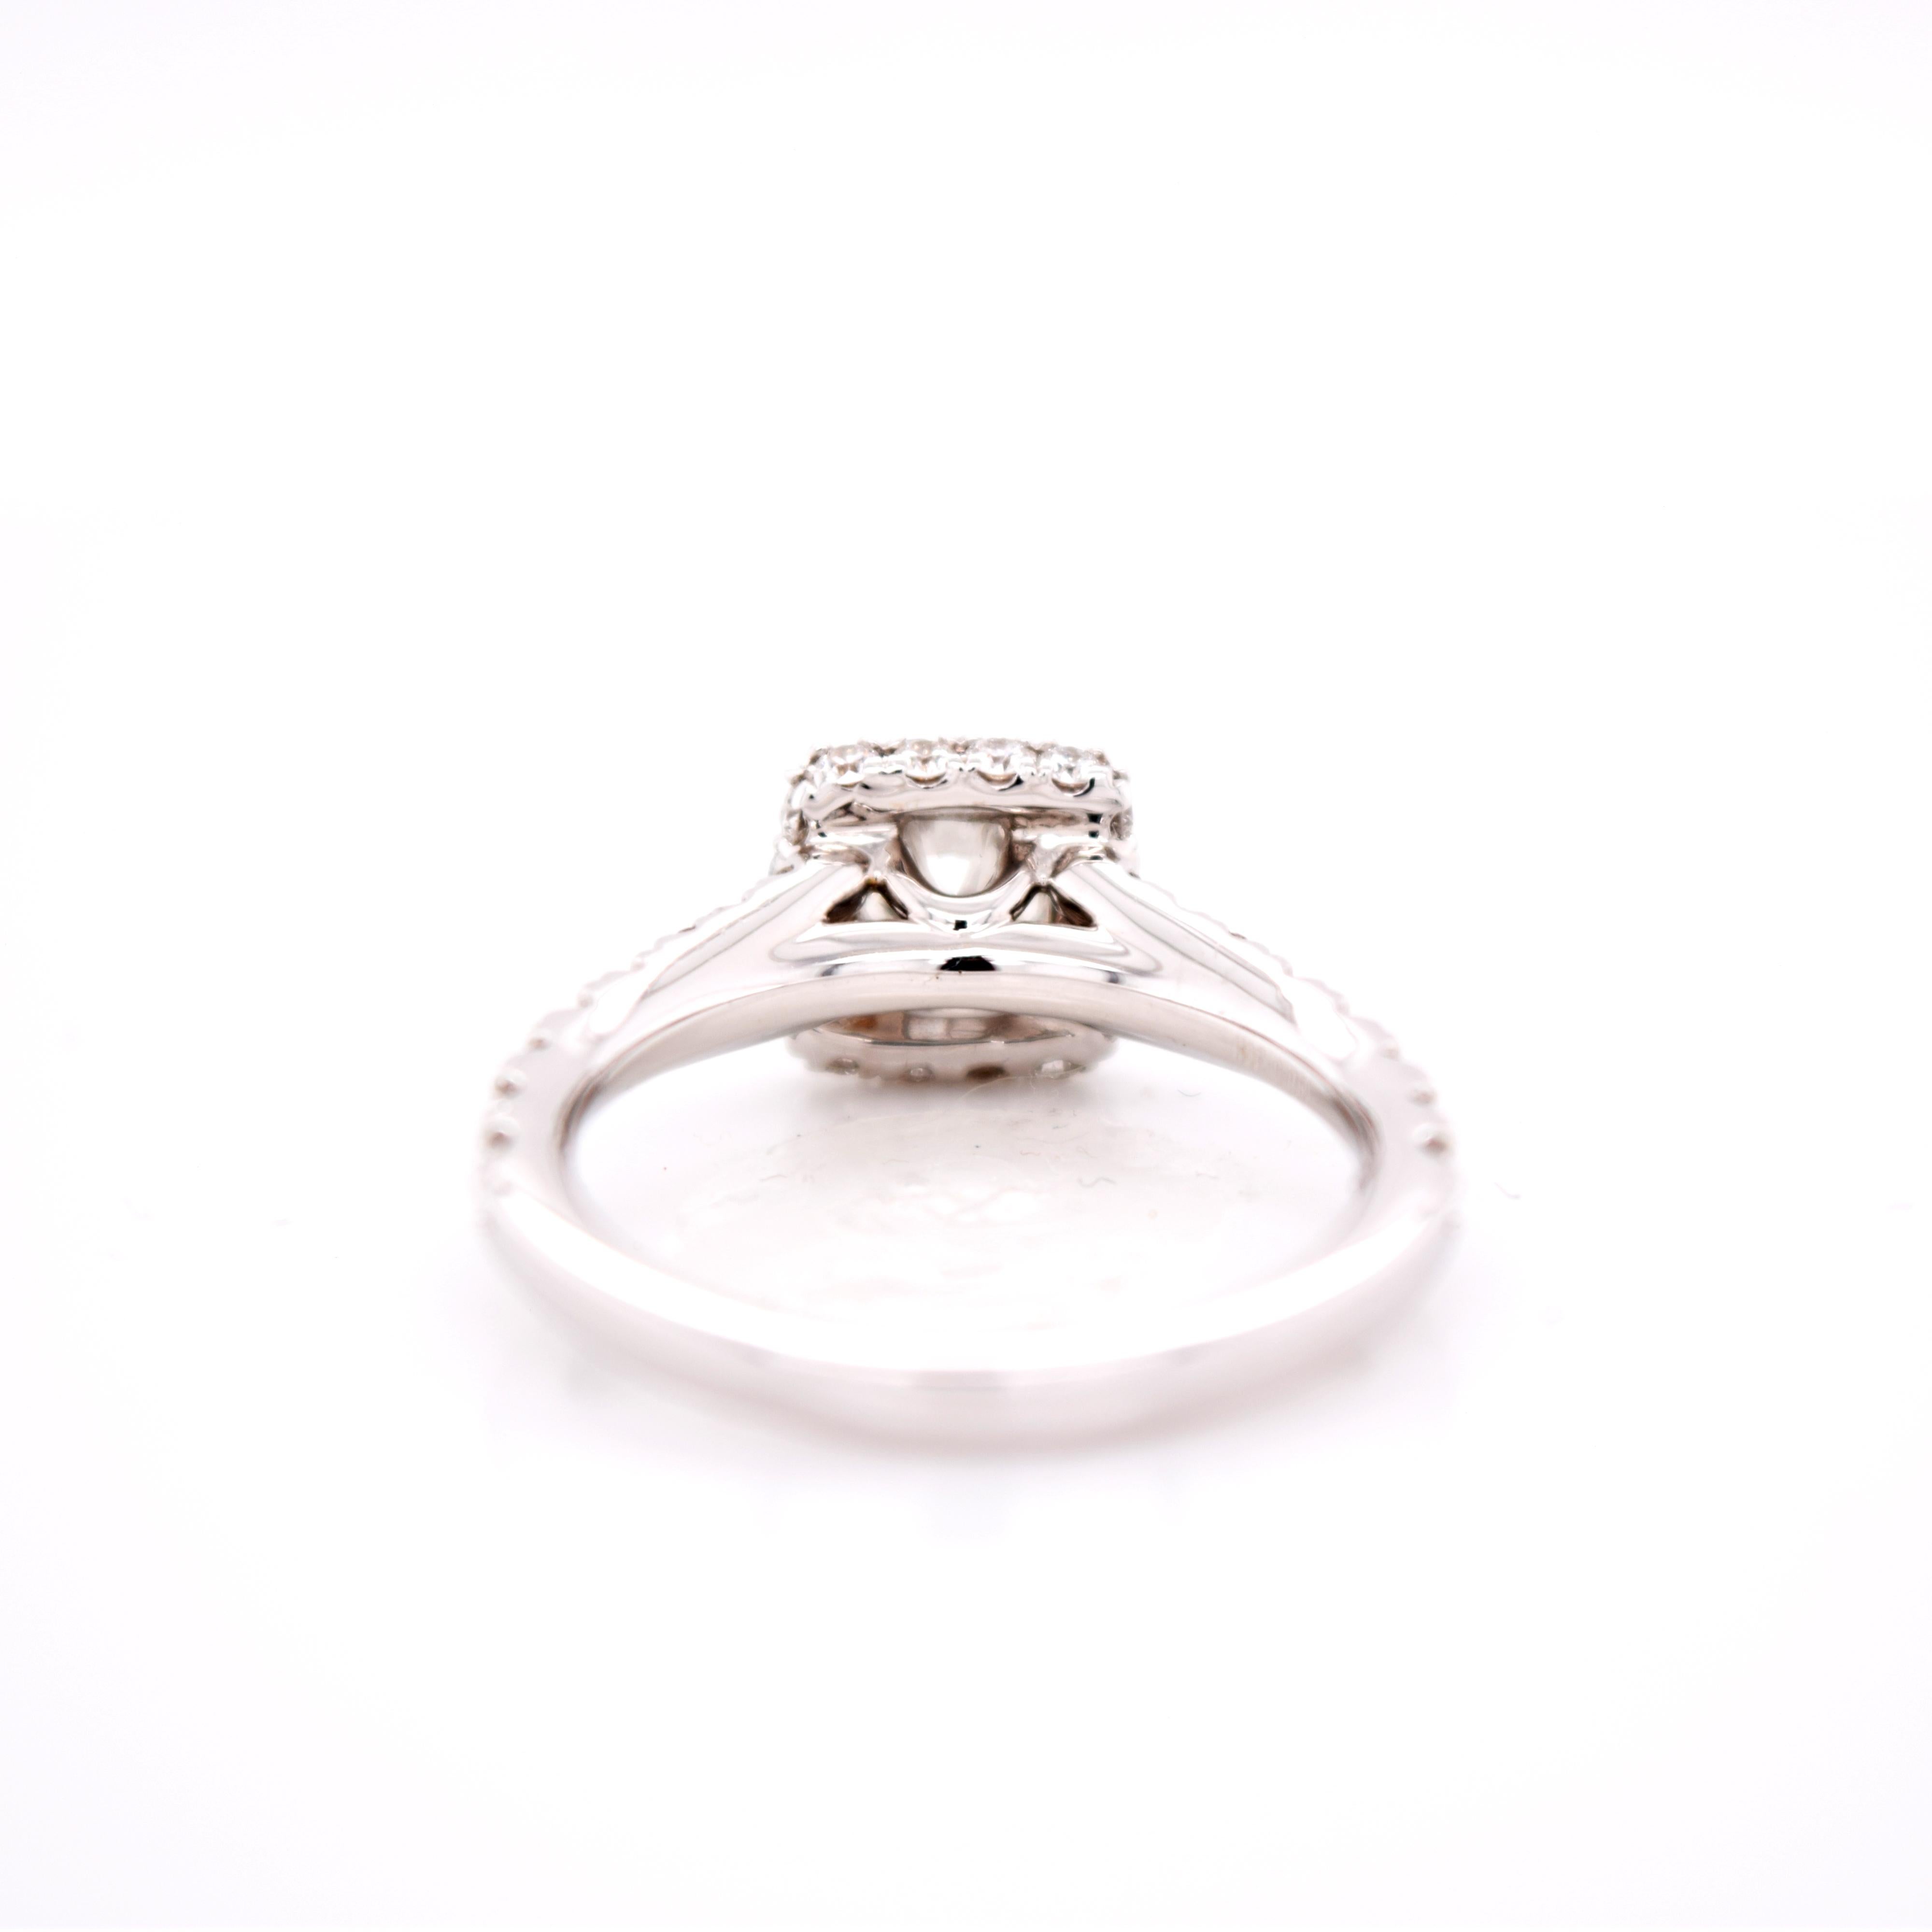 Contemporary 1.25 Carat Total Weight Round Diamond Engagement Ring with Diamond Halo For Sale